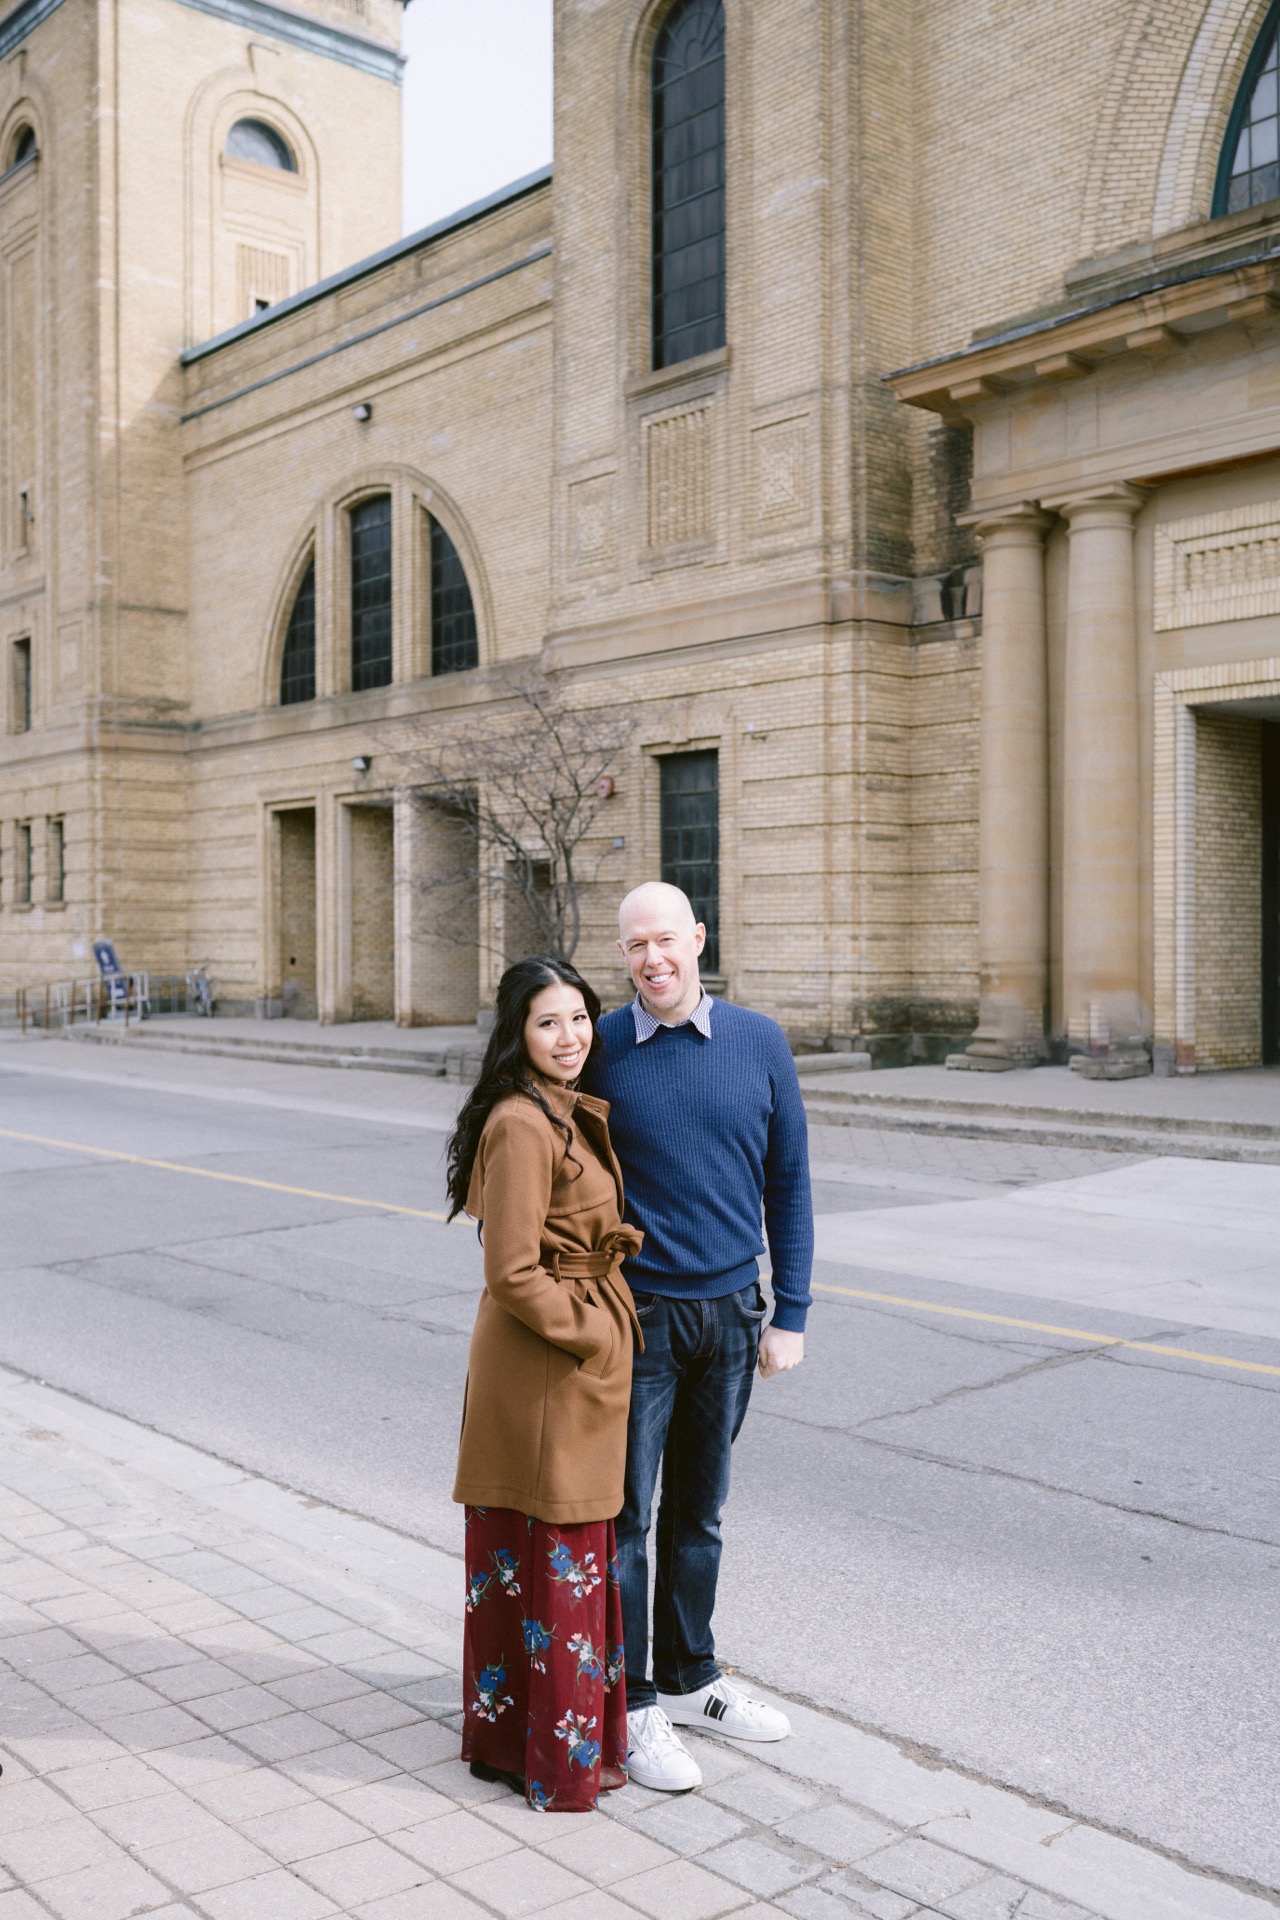 A couple standing together and smiling on a city street with Exhibition Place in the background